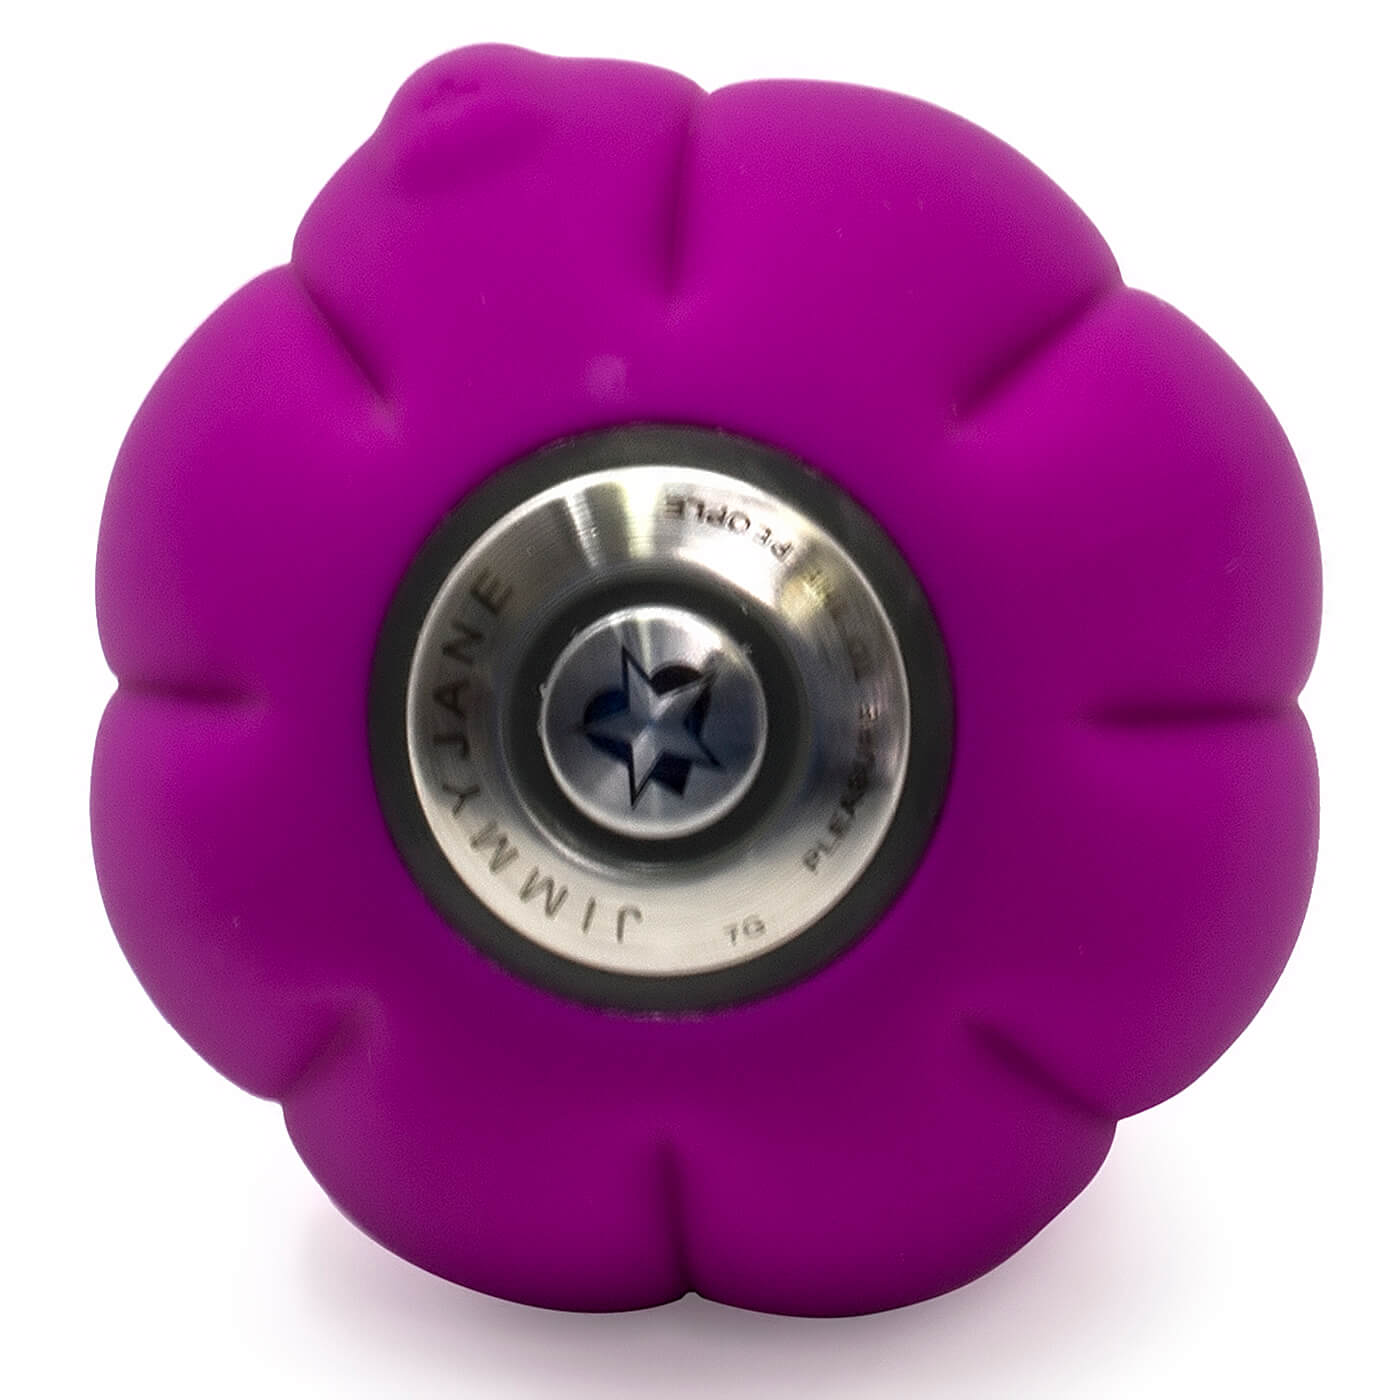 Jimmyjane Love Pods OM Rechargeable Waterproof Clitoral Vibrator